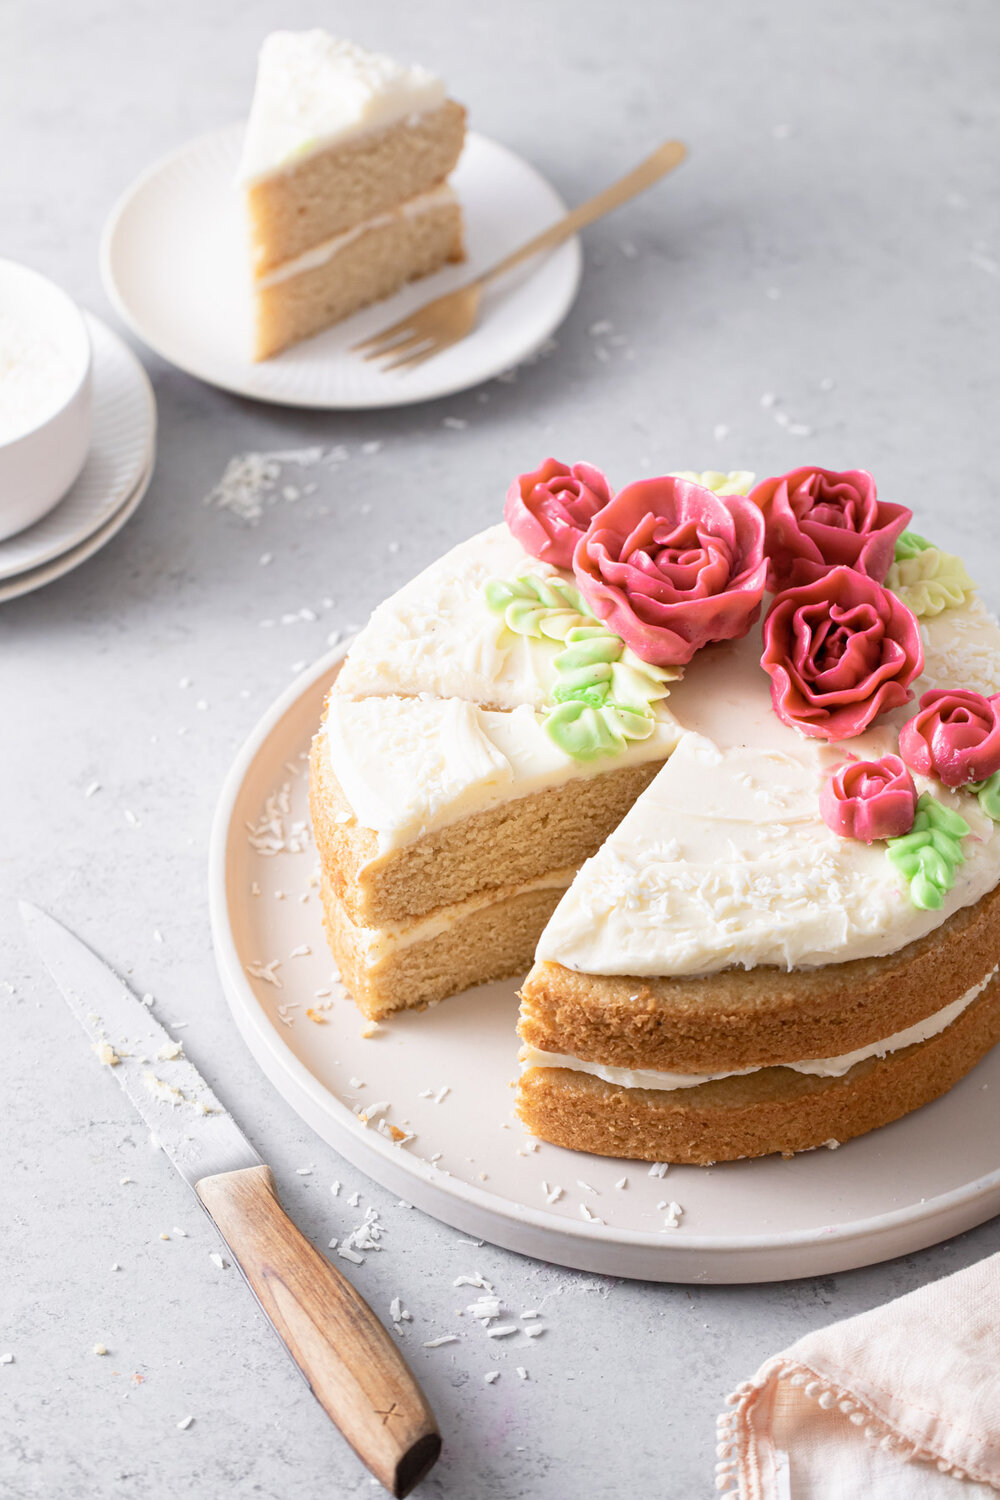 Almond layer cake with swirls of cream cheese frosting.  The perfect two-layer "naked" cake for spring!